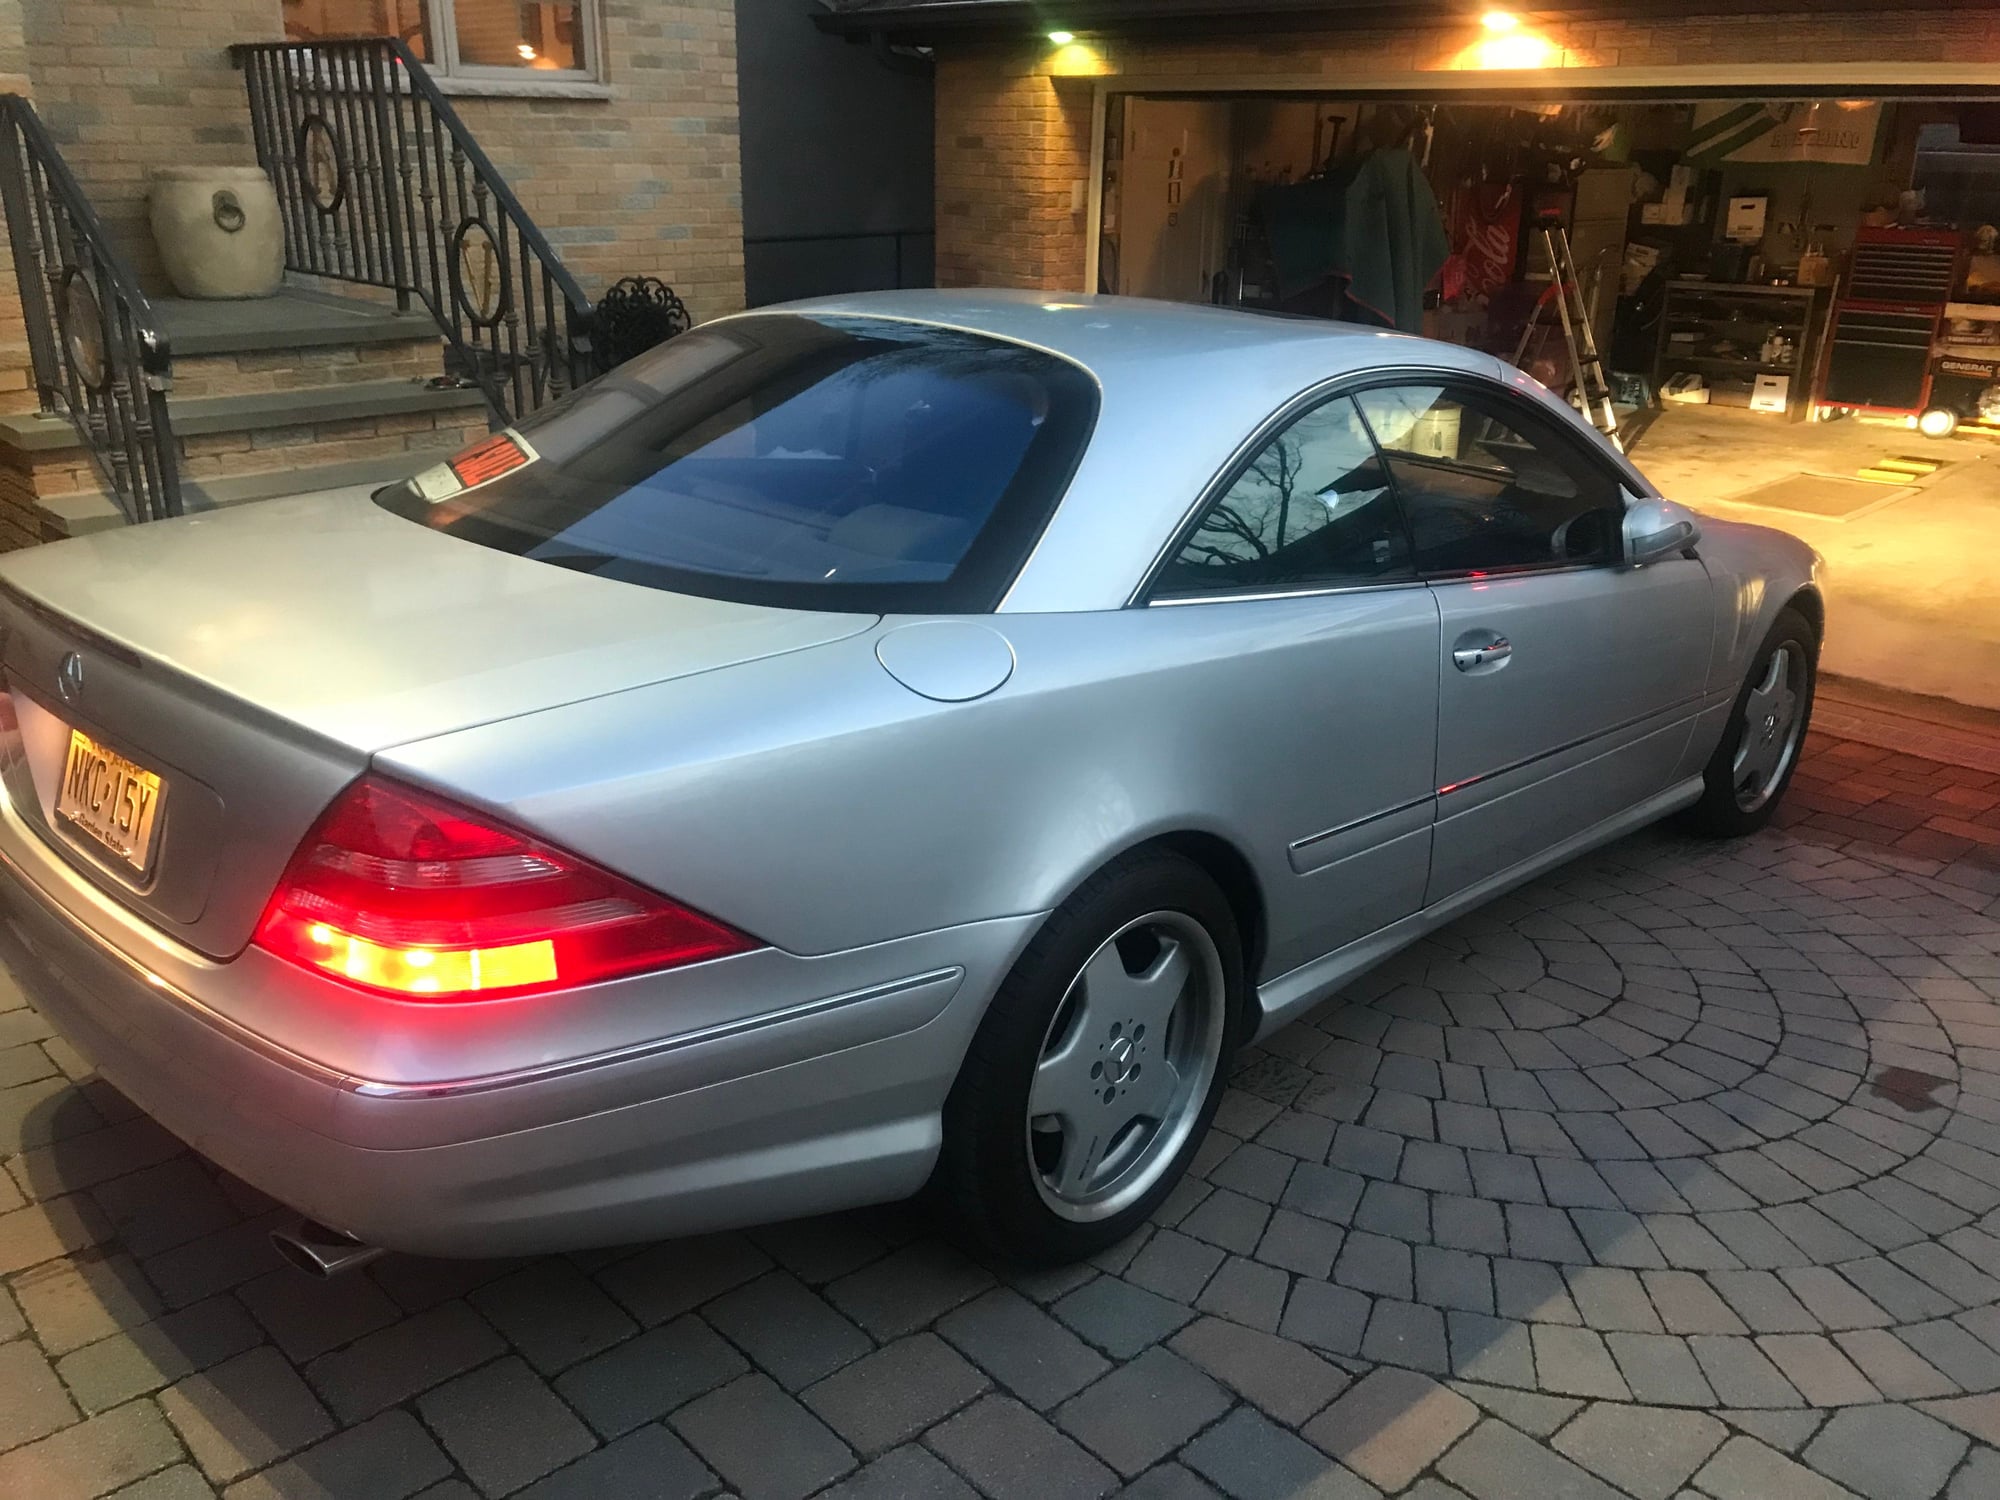 2002 Mercedes-Benz CL500 - 2002 CL500 *BRAND NEW CONDITION* 3264 Miles! *ONE OWNER* - Used - VIN WDBPJ75JX2A030463 - 3,264 Miles - 8 cyl - 2WD - Automatic - Coupe - Silver - Cliffside Park, NJ 07010, United States